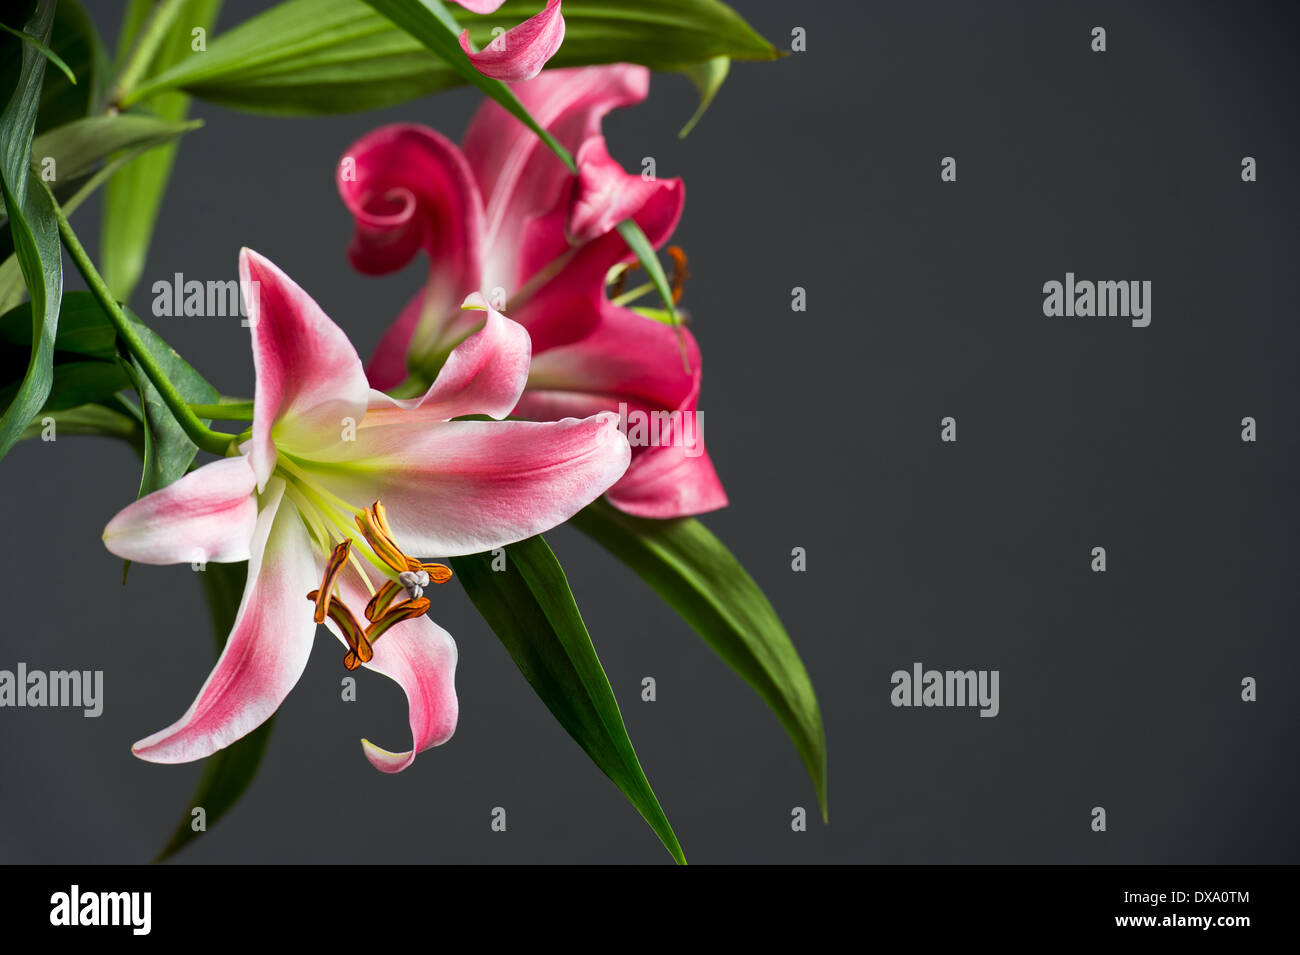 Pink lily flowers on black background with with free space for your text Stock Photo